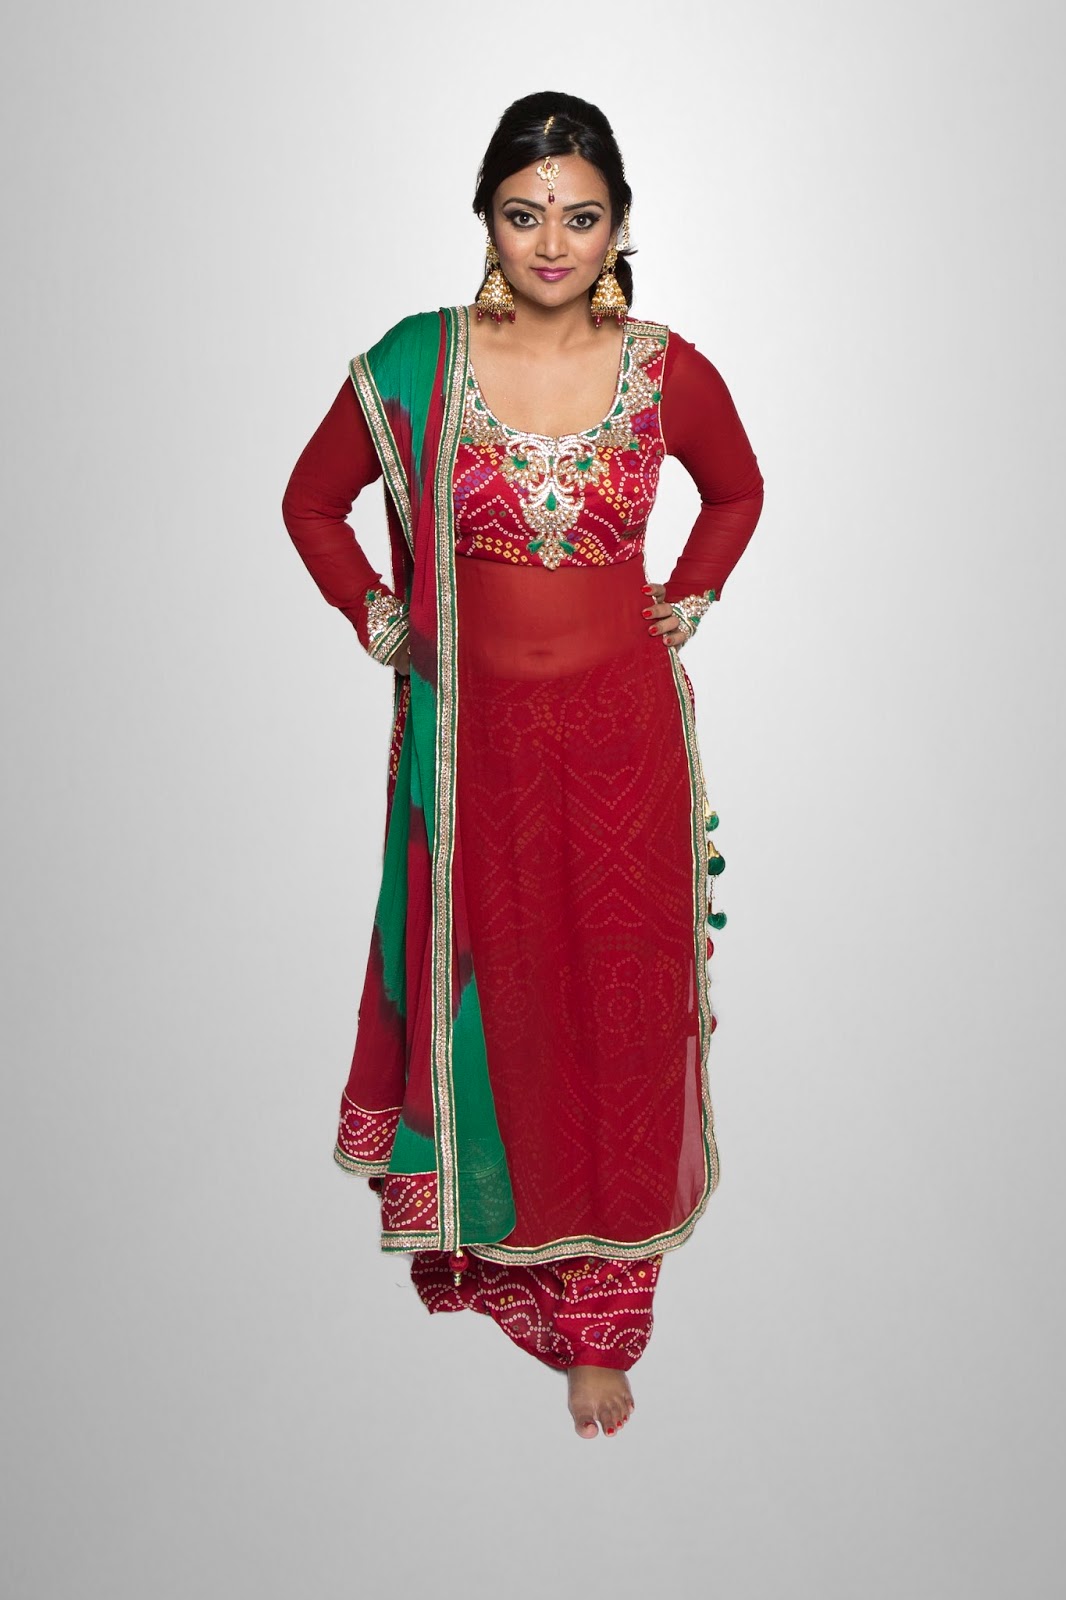 Glameve Fashion review, new indian bride look, red bandhani salwar, indian ethnic outfits online, ethnic fashion blogger 